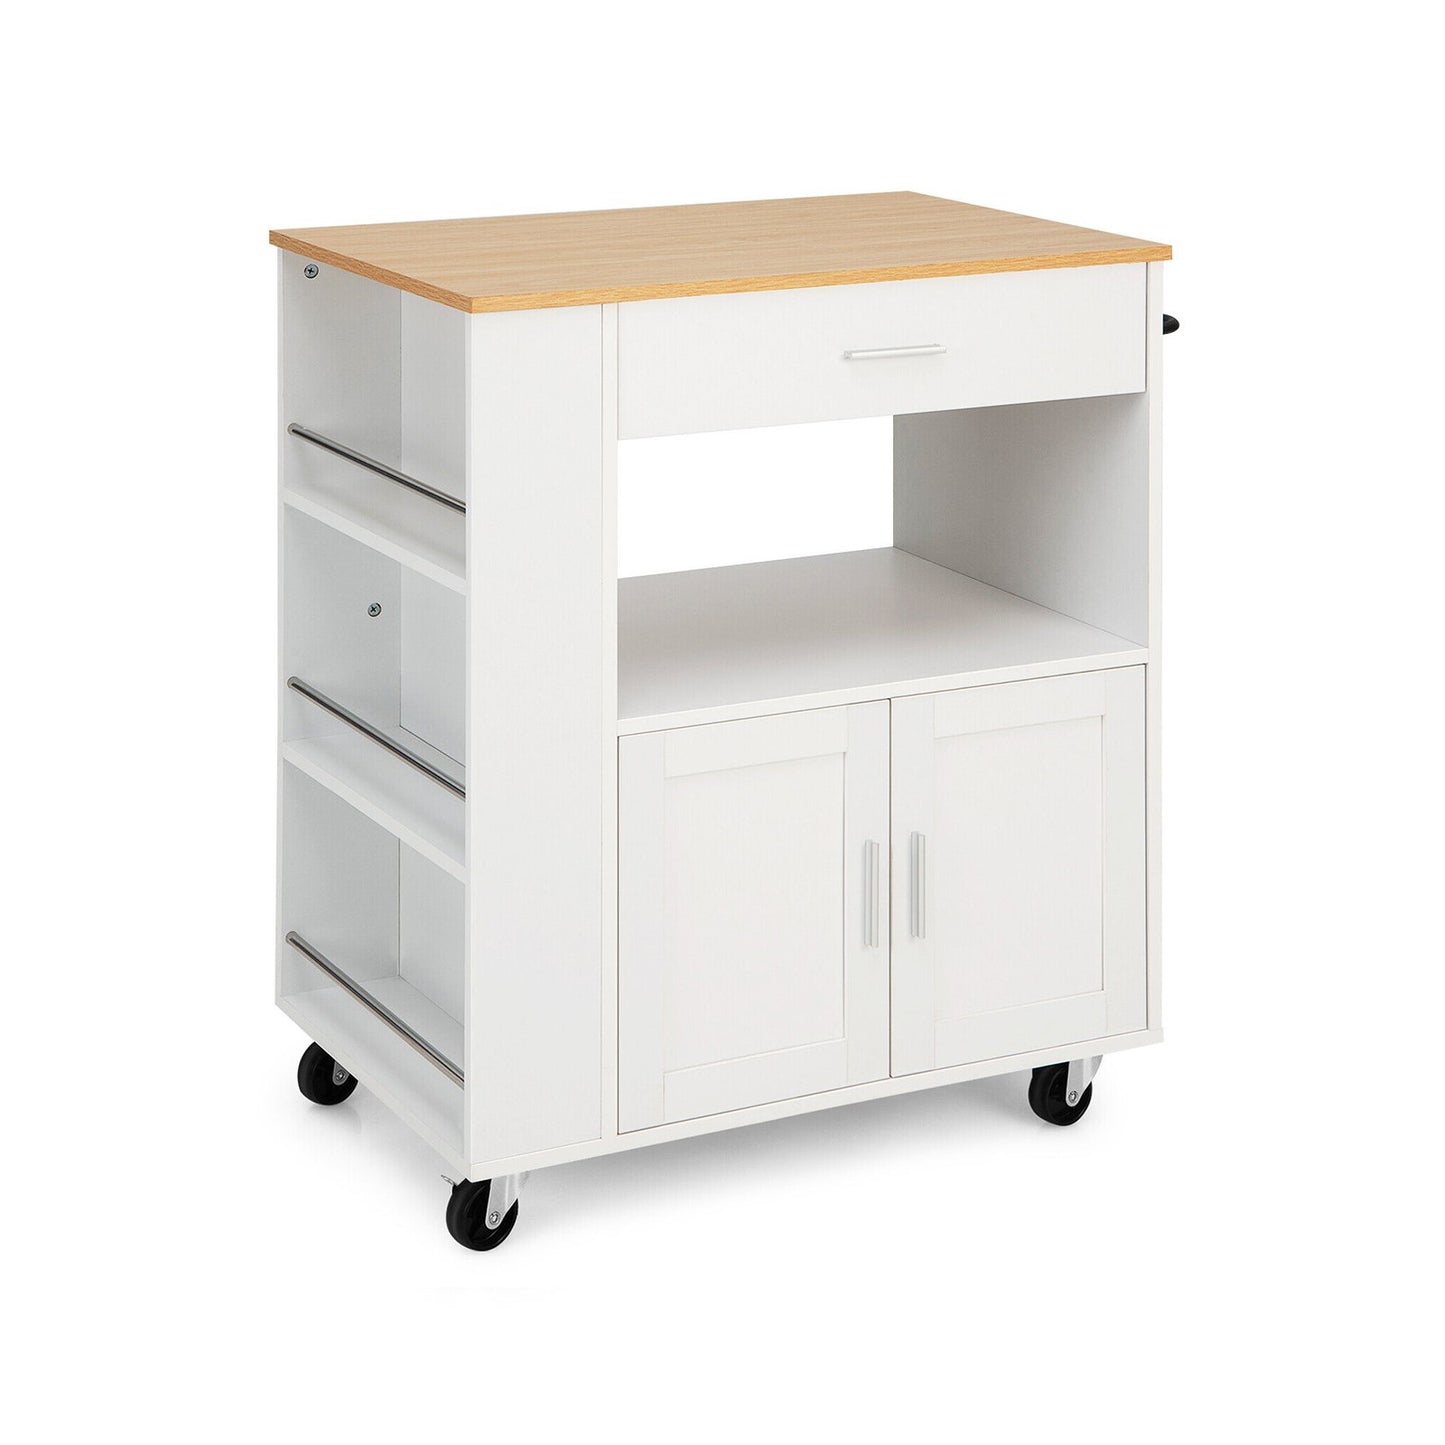 Kitchen Island Cart Rolling Storage Cabinet with Drawer and Spice Rack Shelf, White